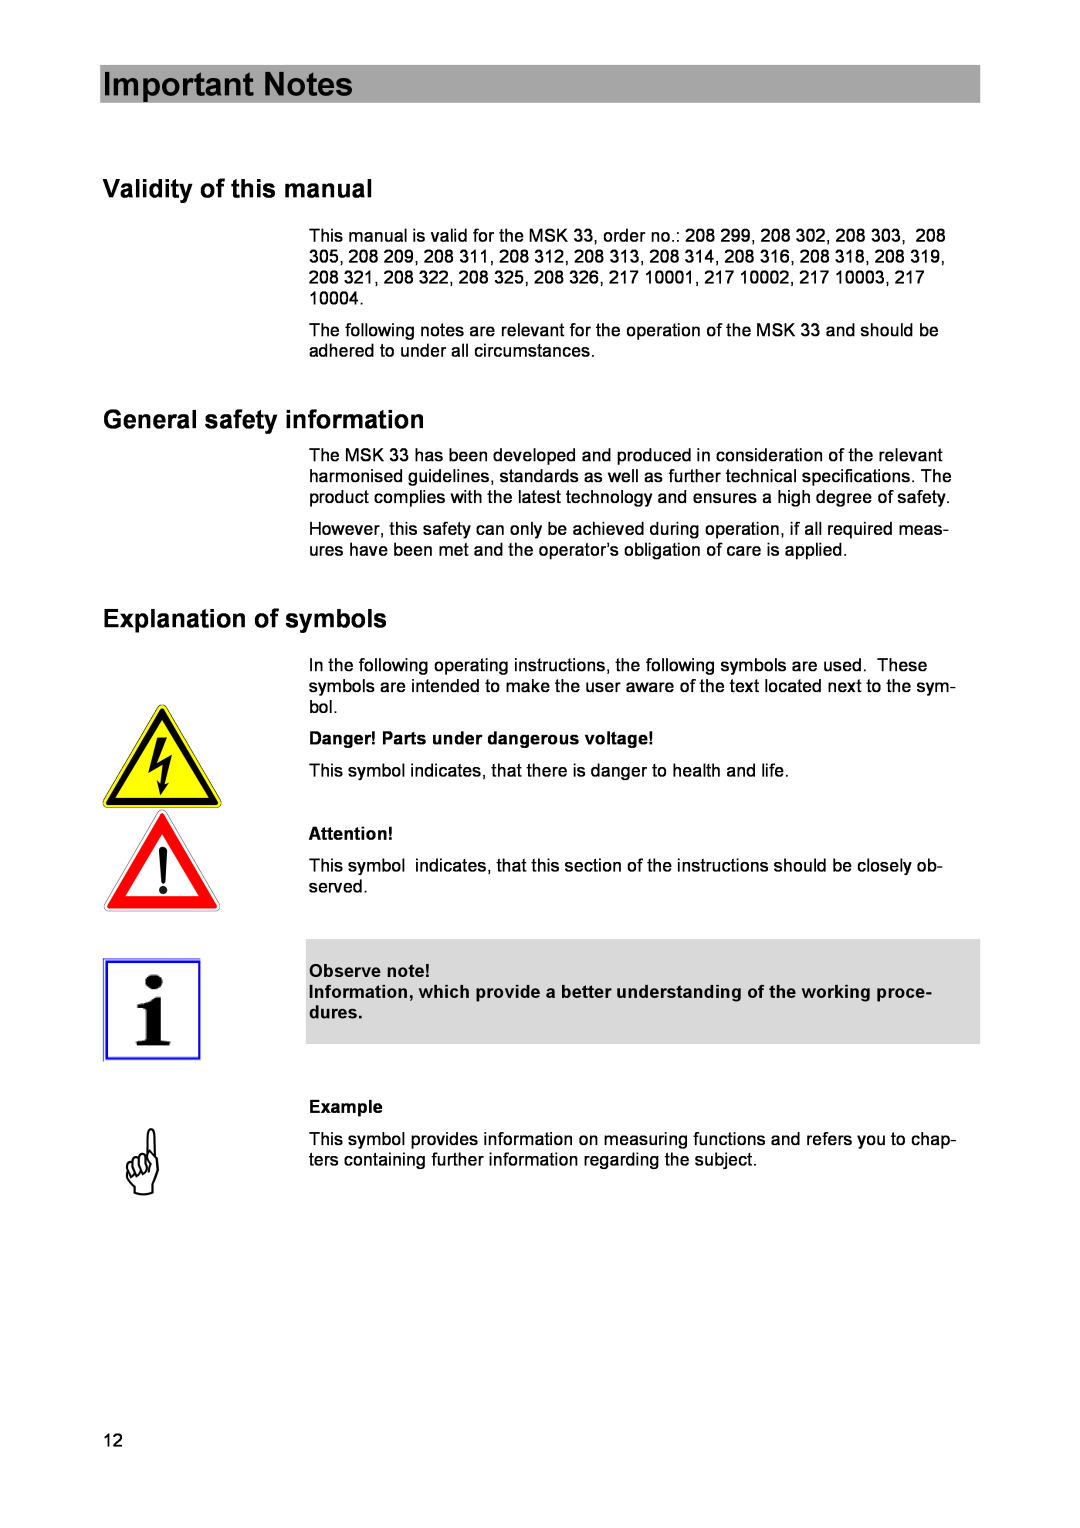 DreamGEAR MSK 33 Important Notes, Validity of this manual, General safety information, Explanation of symbols, Example 